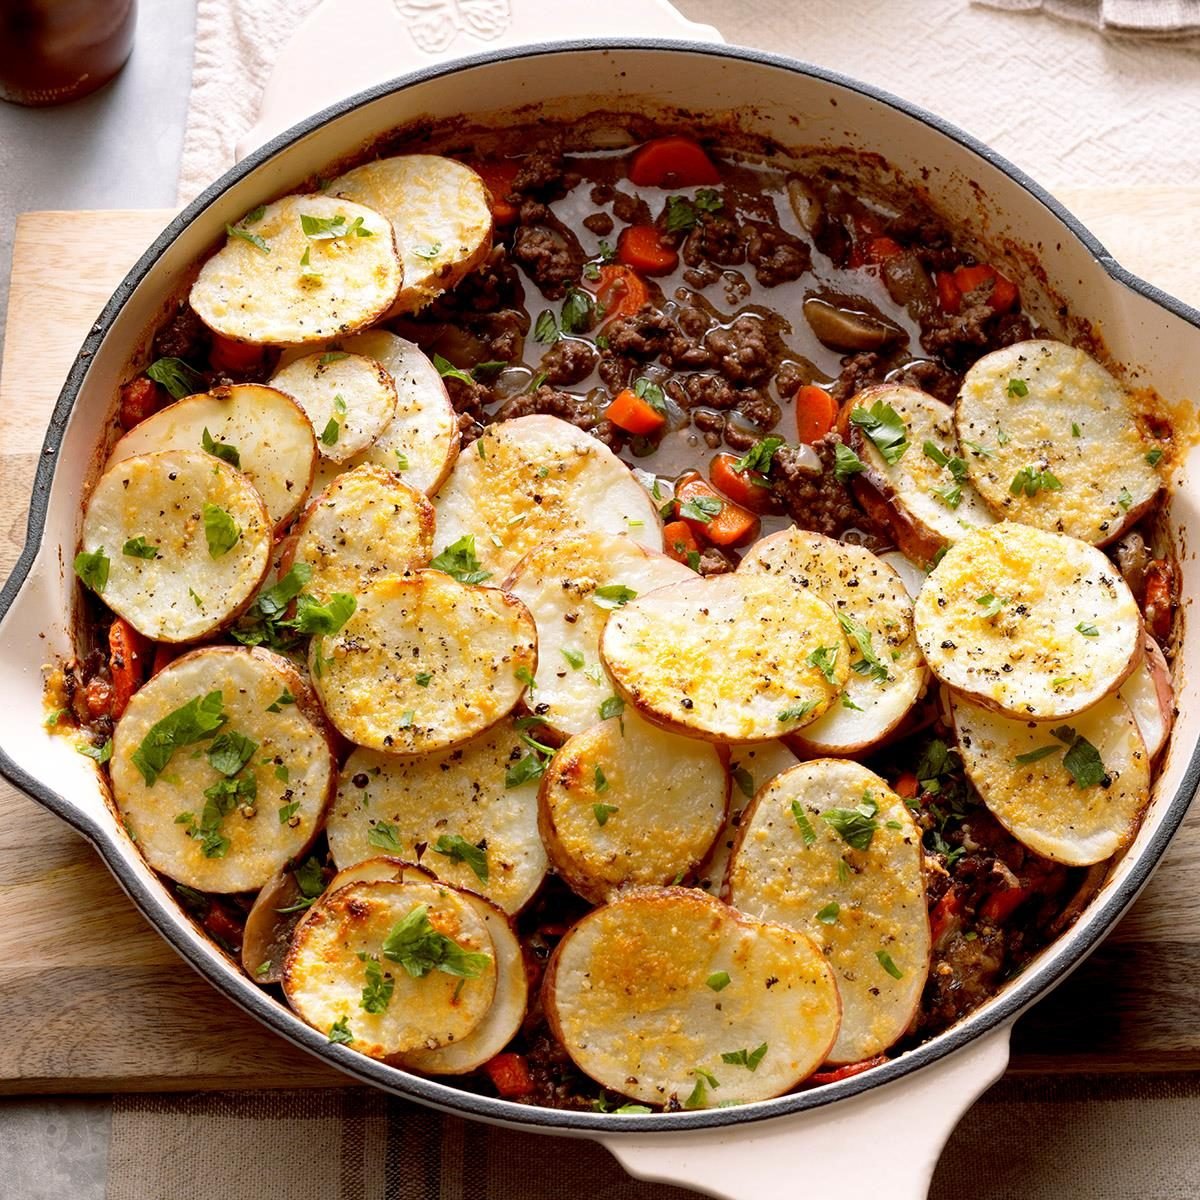 Day 1 Dinner: Potato-Topped Ground Beef Skillet